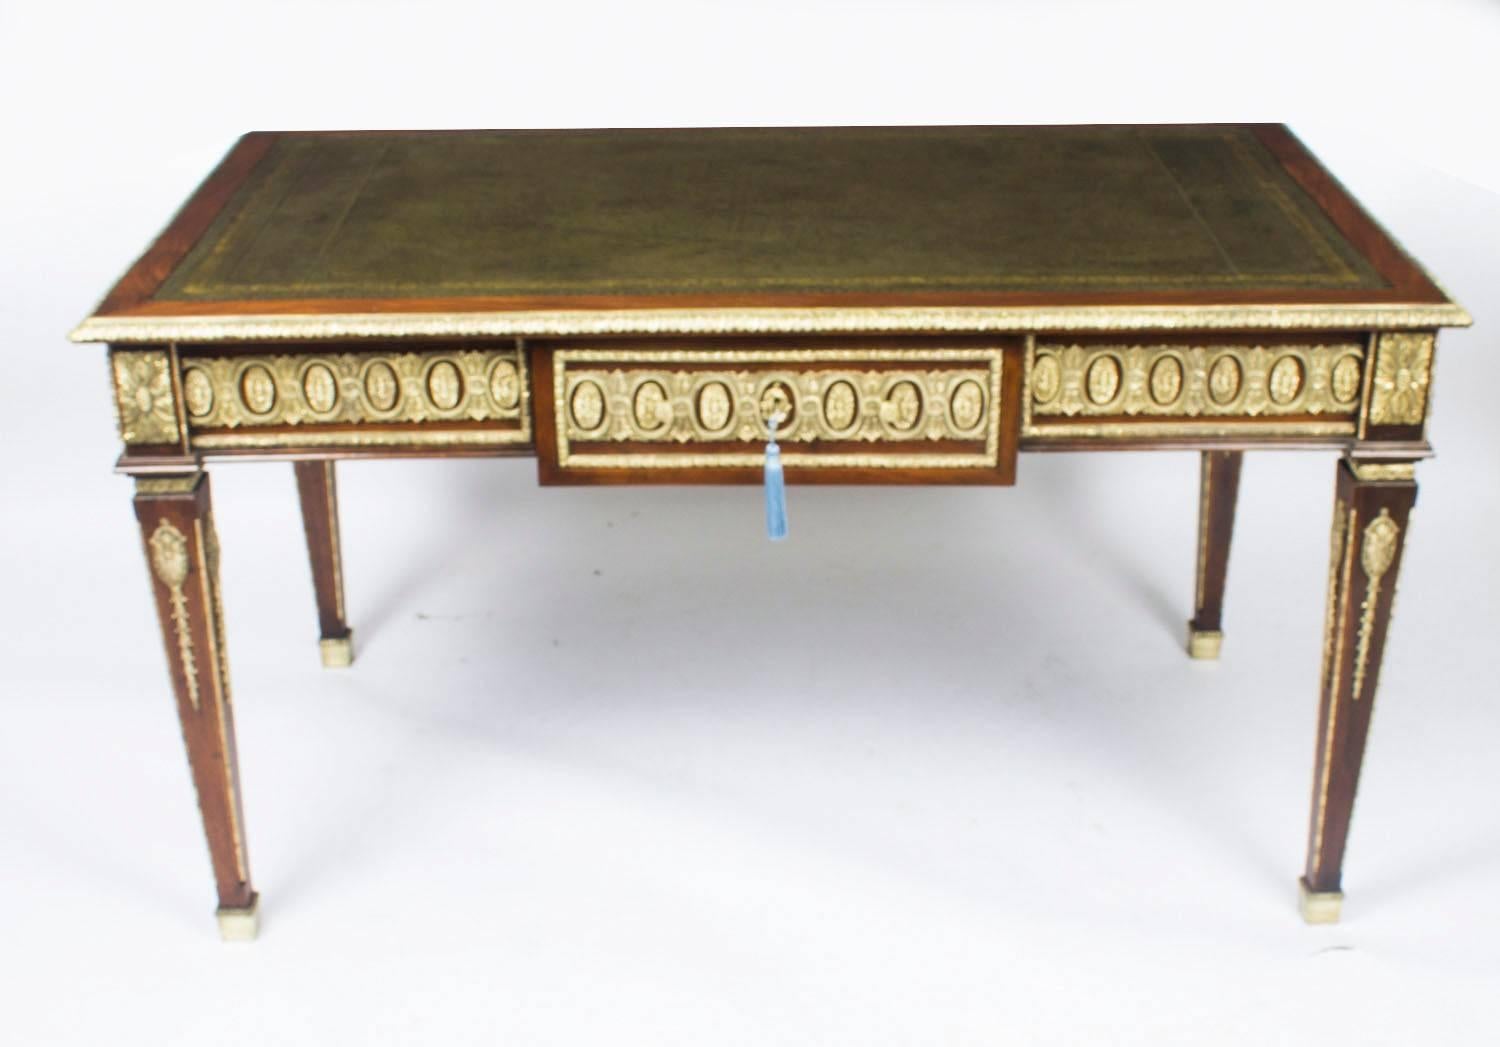 This is a fine antique French gilt-bronze mounted mahogany Empire style bureau plat, circa 1900 in date.
 
It has a green inset gold-tooled leather writing surface and the top has a very decorative gilt bronze border.

The frieze has a central